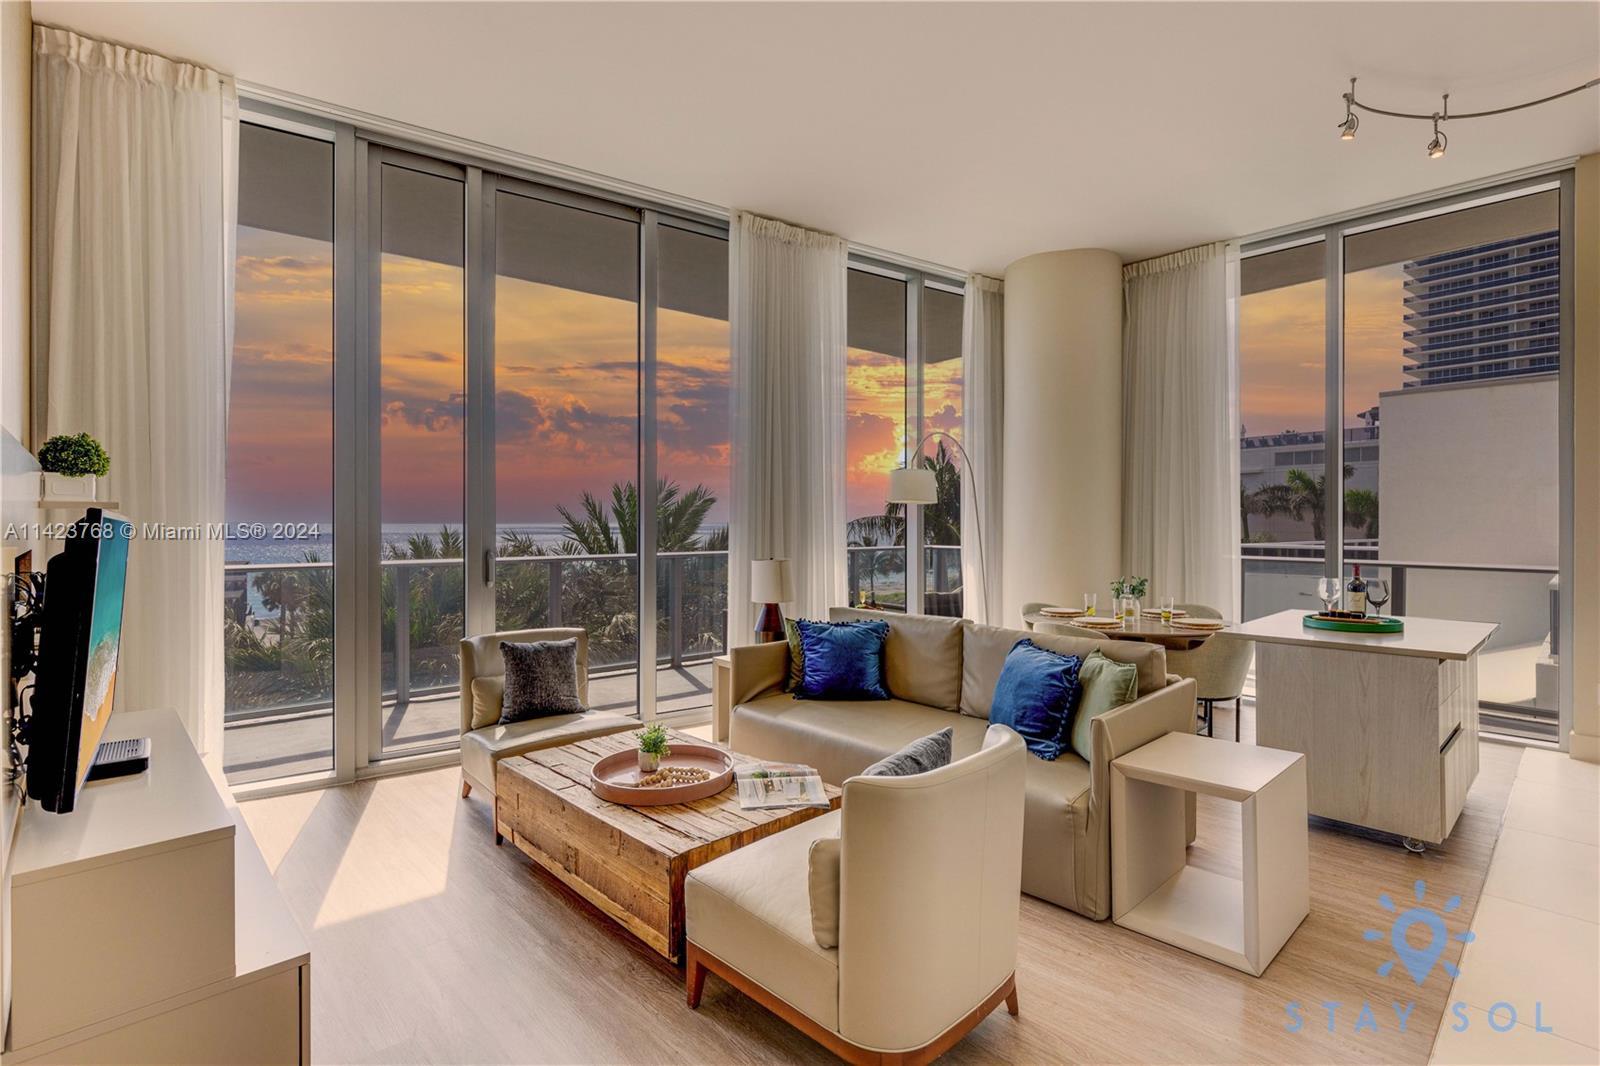 Photo of 4111 S Ocean Dr #305 in Hollywood, FL